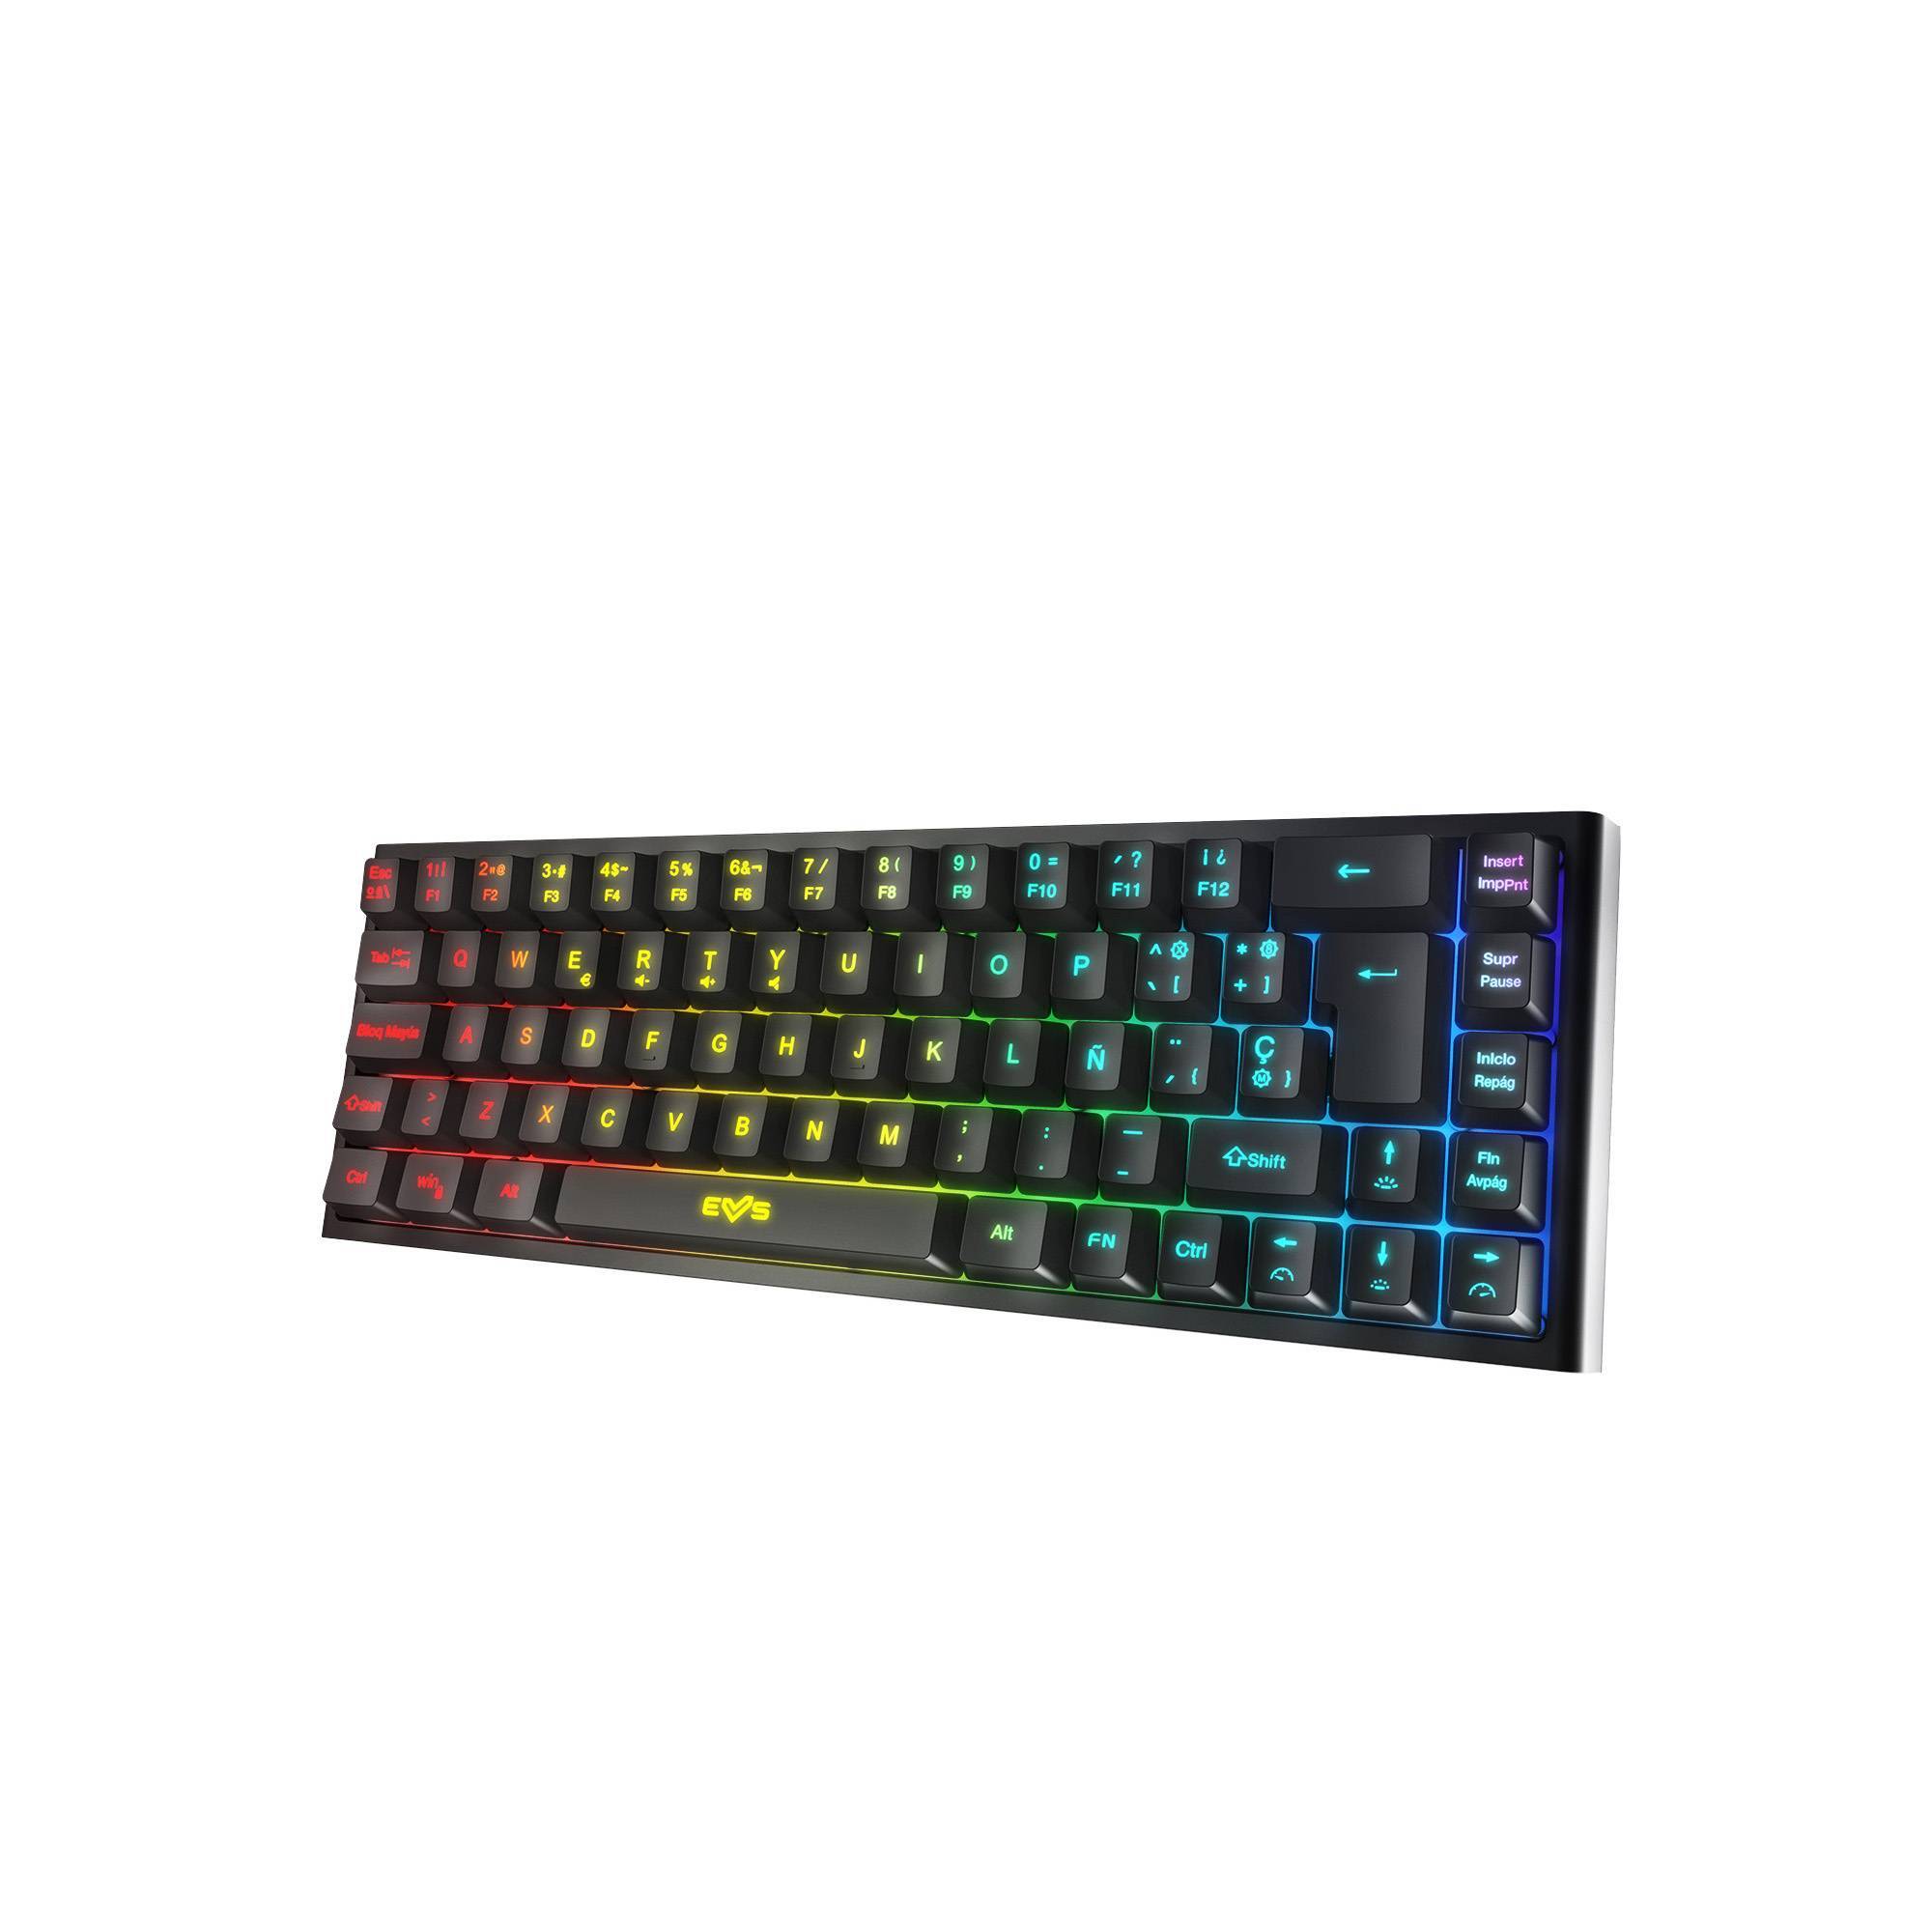 PC keyboard with 11 RGB backlight modes